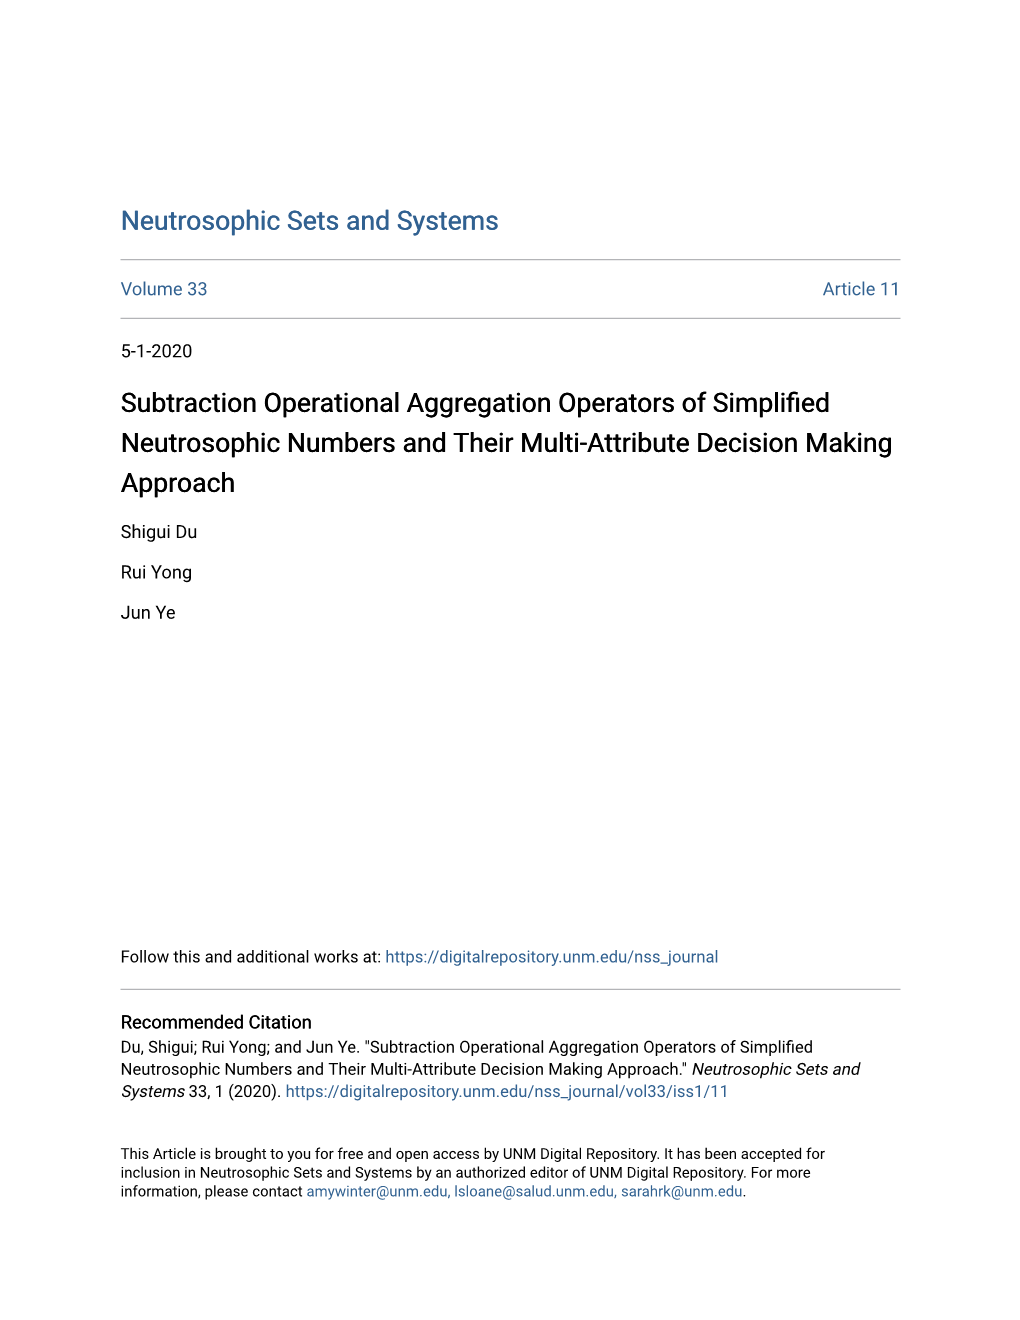 Subtraction Operational Aggregation Operators of Simplified Neutrosophic Numbers and Their Multi-Attribute Decision Making Approach